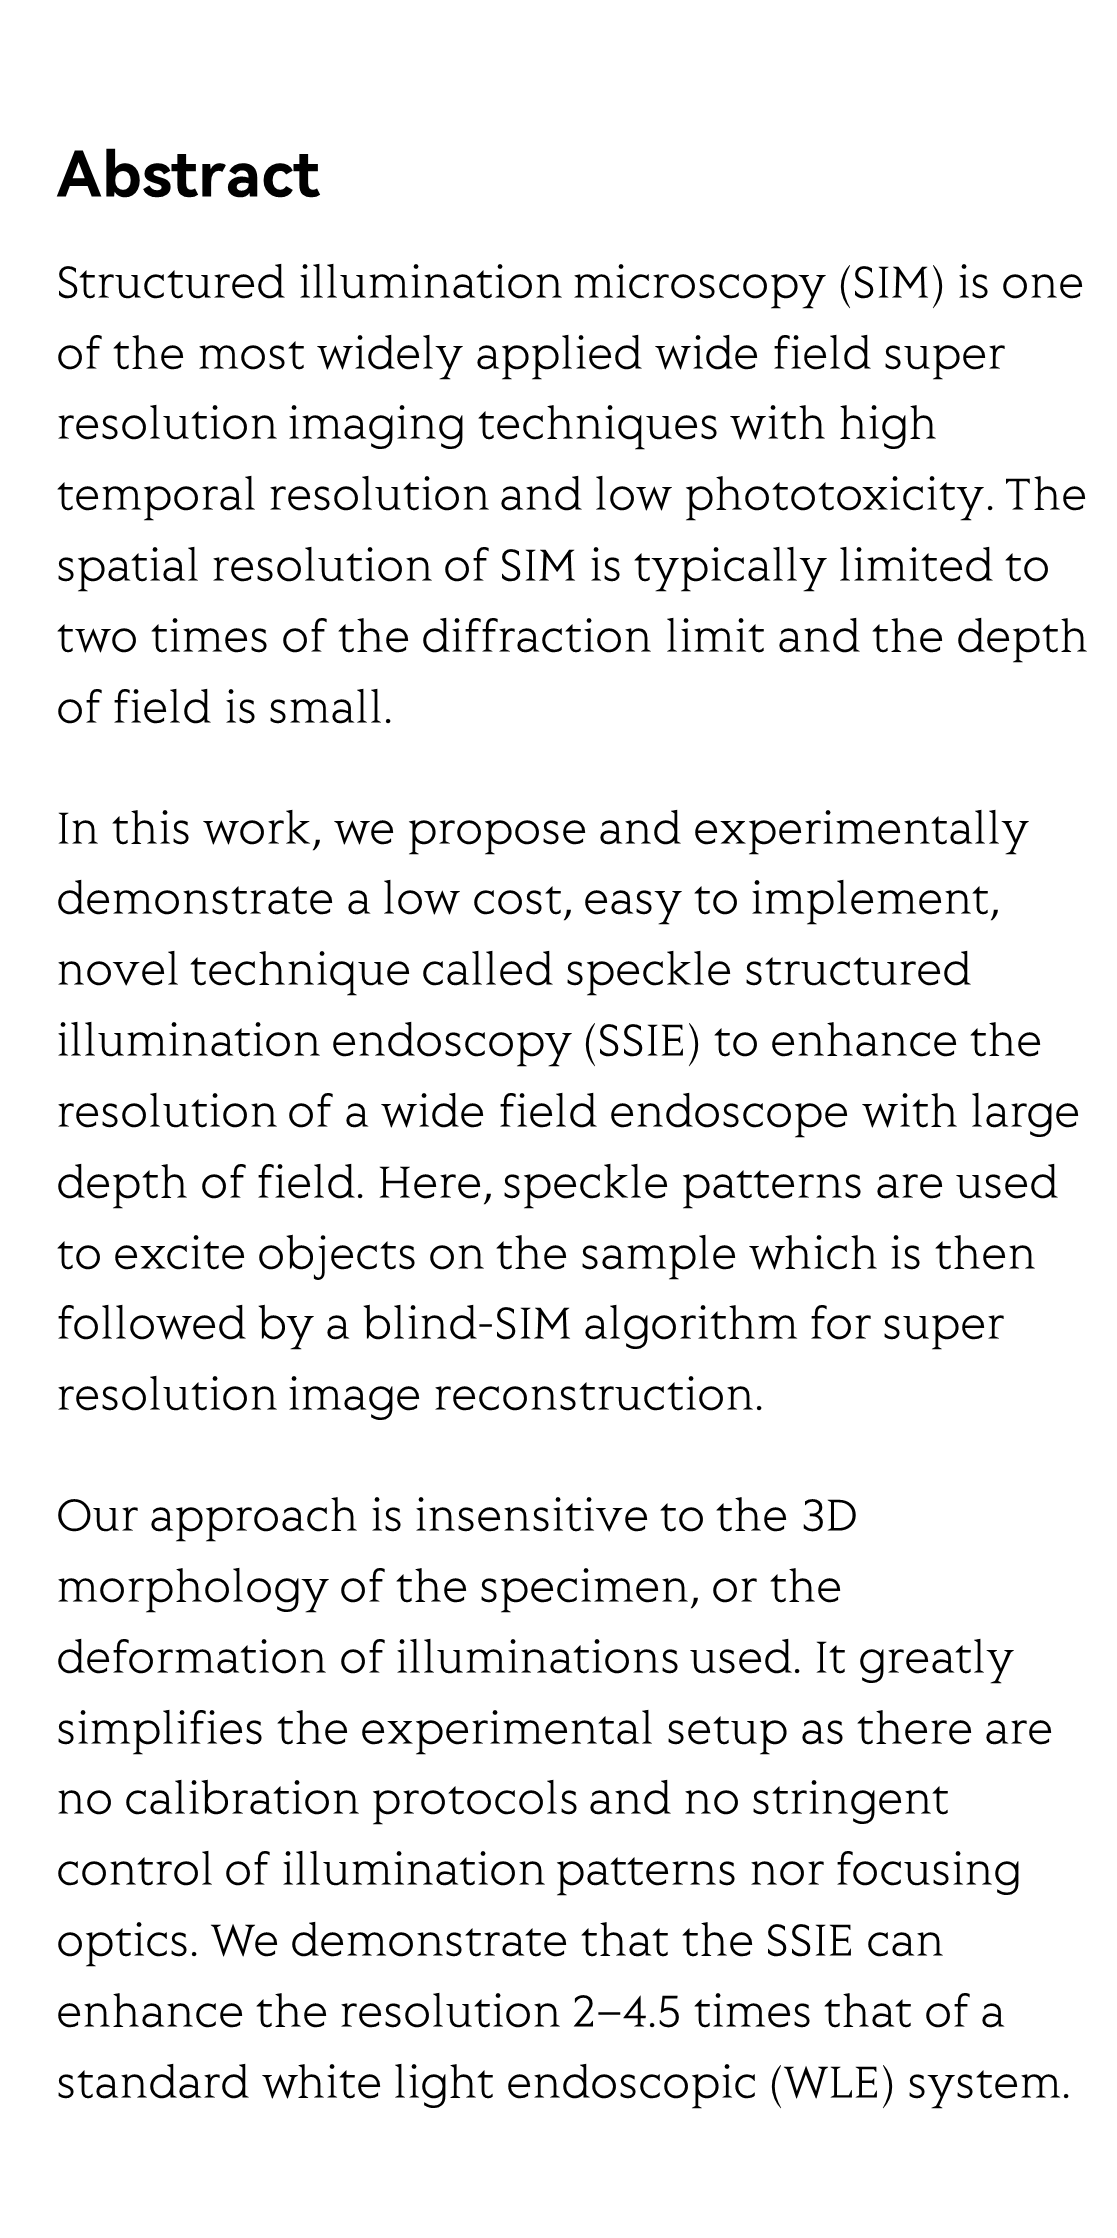 Speckle structured illumination endoscopy with enhanced resolution at wide field of view and depth of field_2